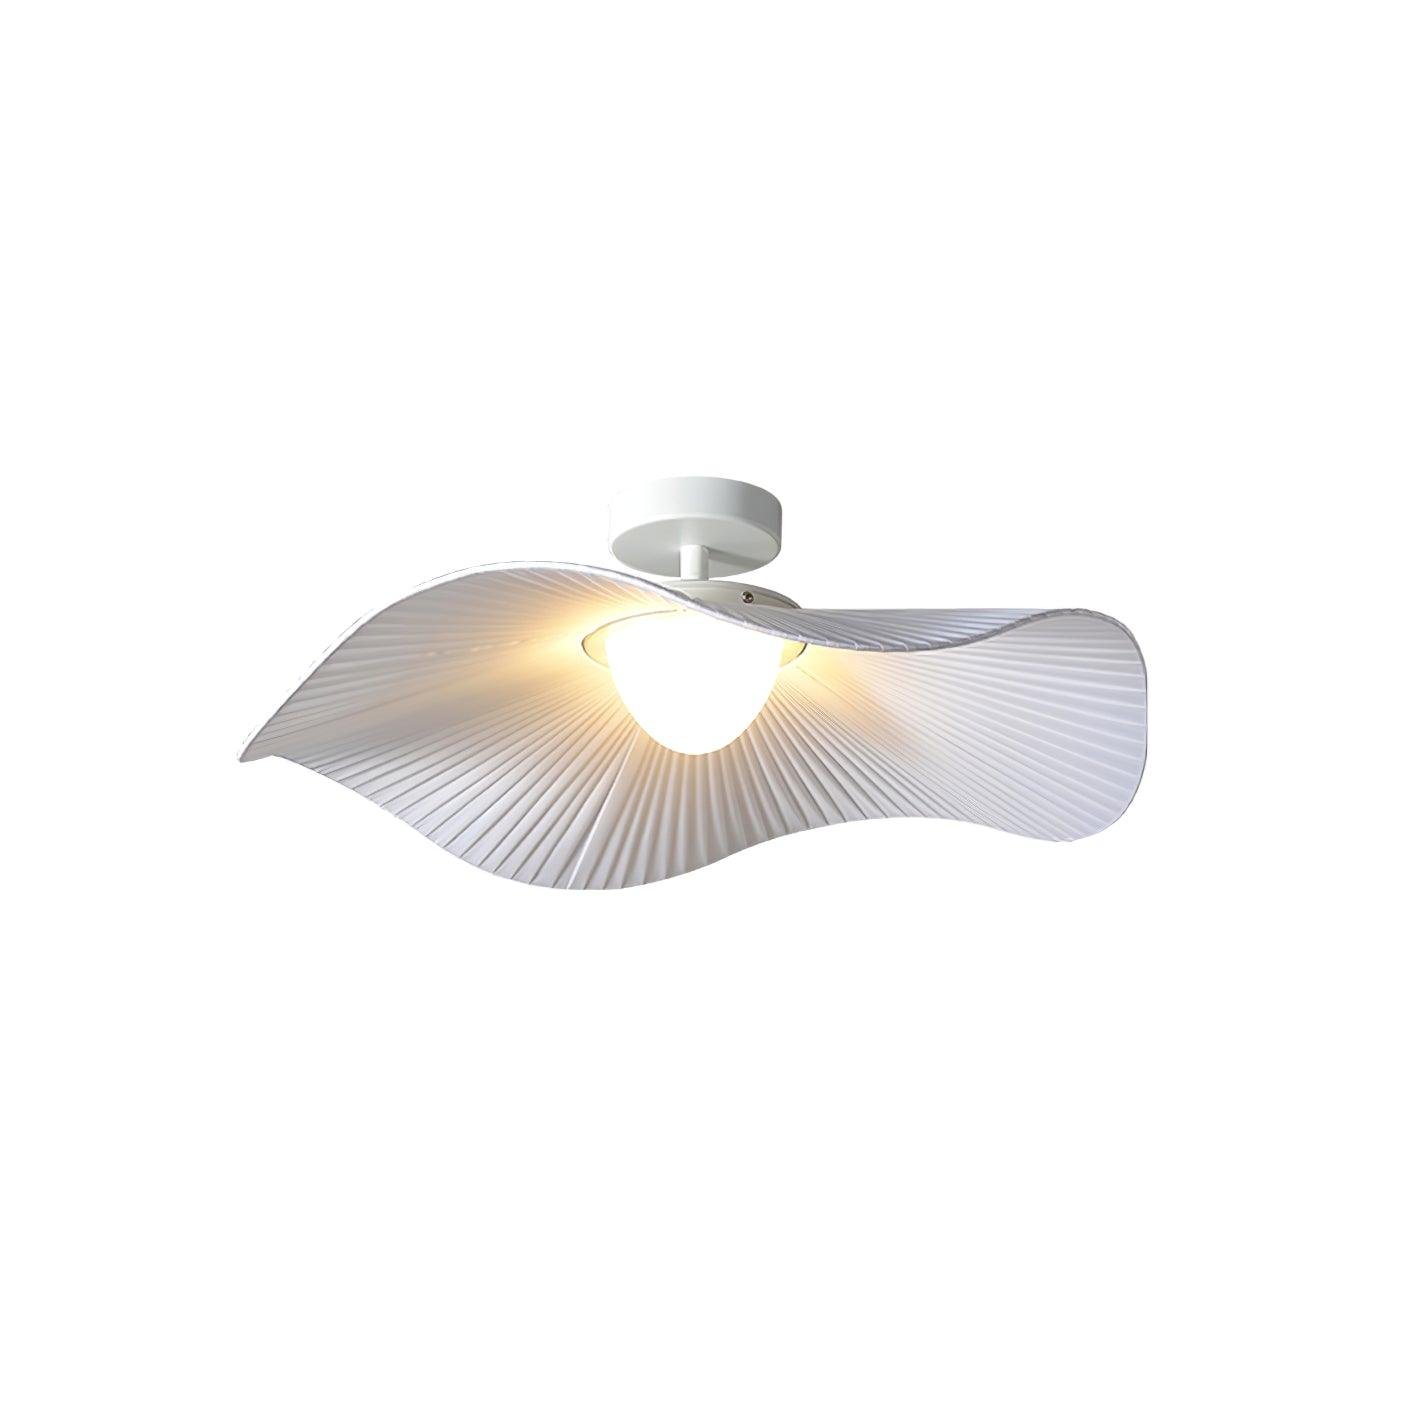 White Cloud Ceiling Light: 23.6-inch Diameter, 7.9-inch Height, Cool White (Equivalent to 60cm Diameter, 20cm Height)